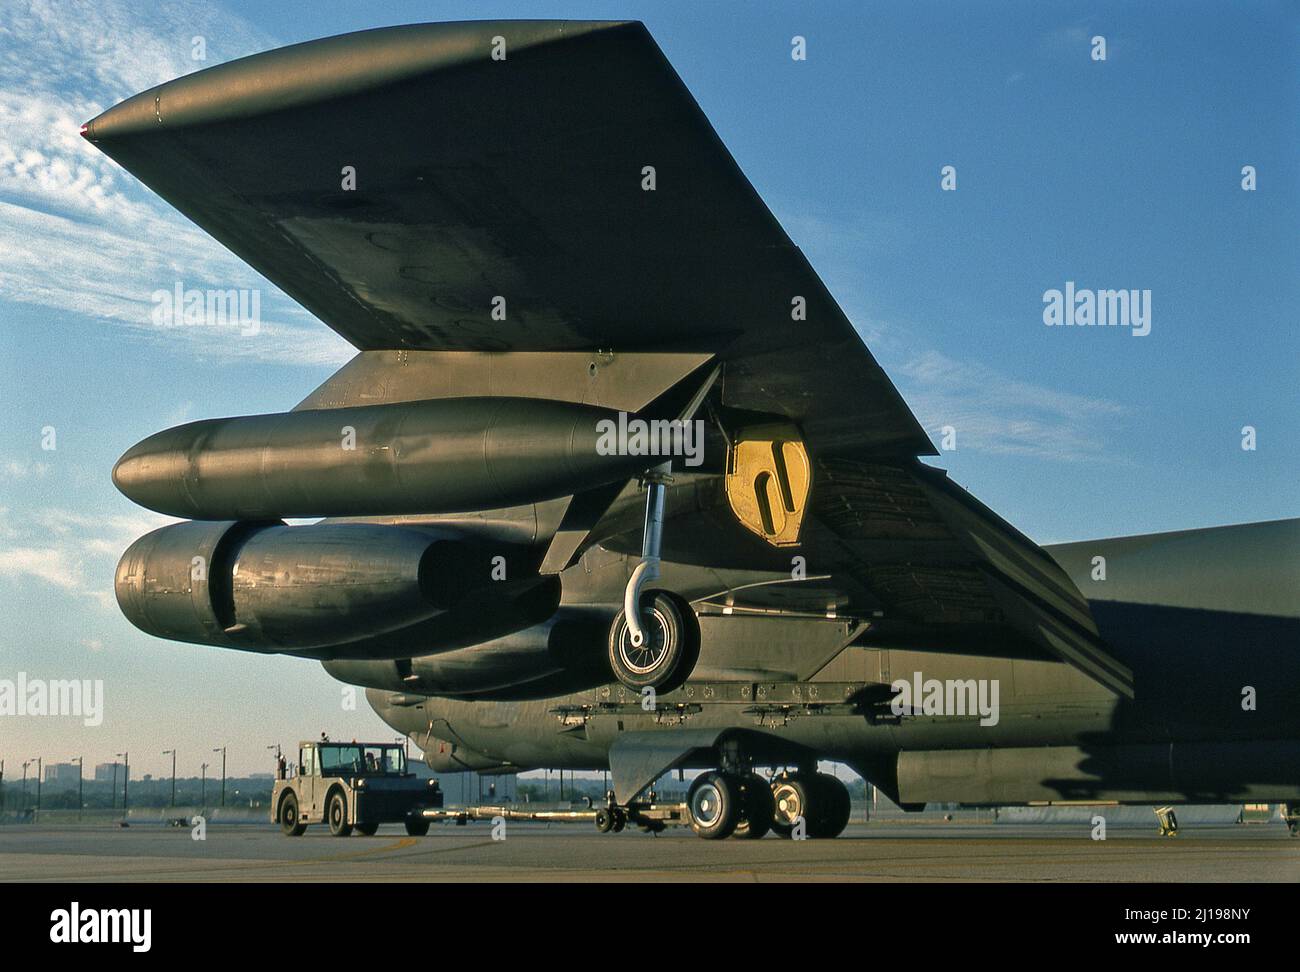 Boeing B-52 Stratofortress Long Range Jet Bomber built by Boeing in the USA. Stock Photo